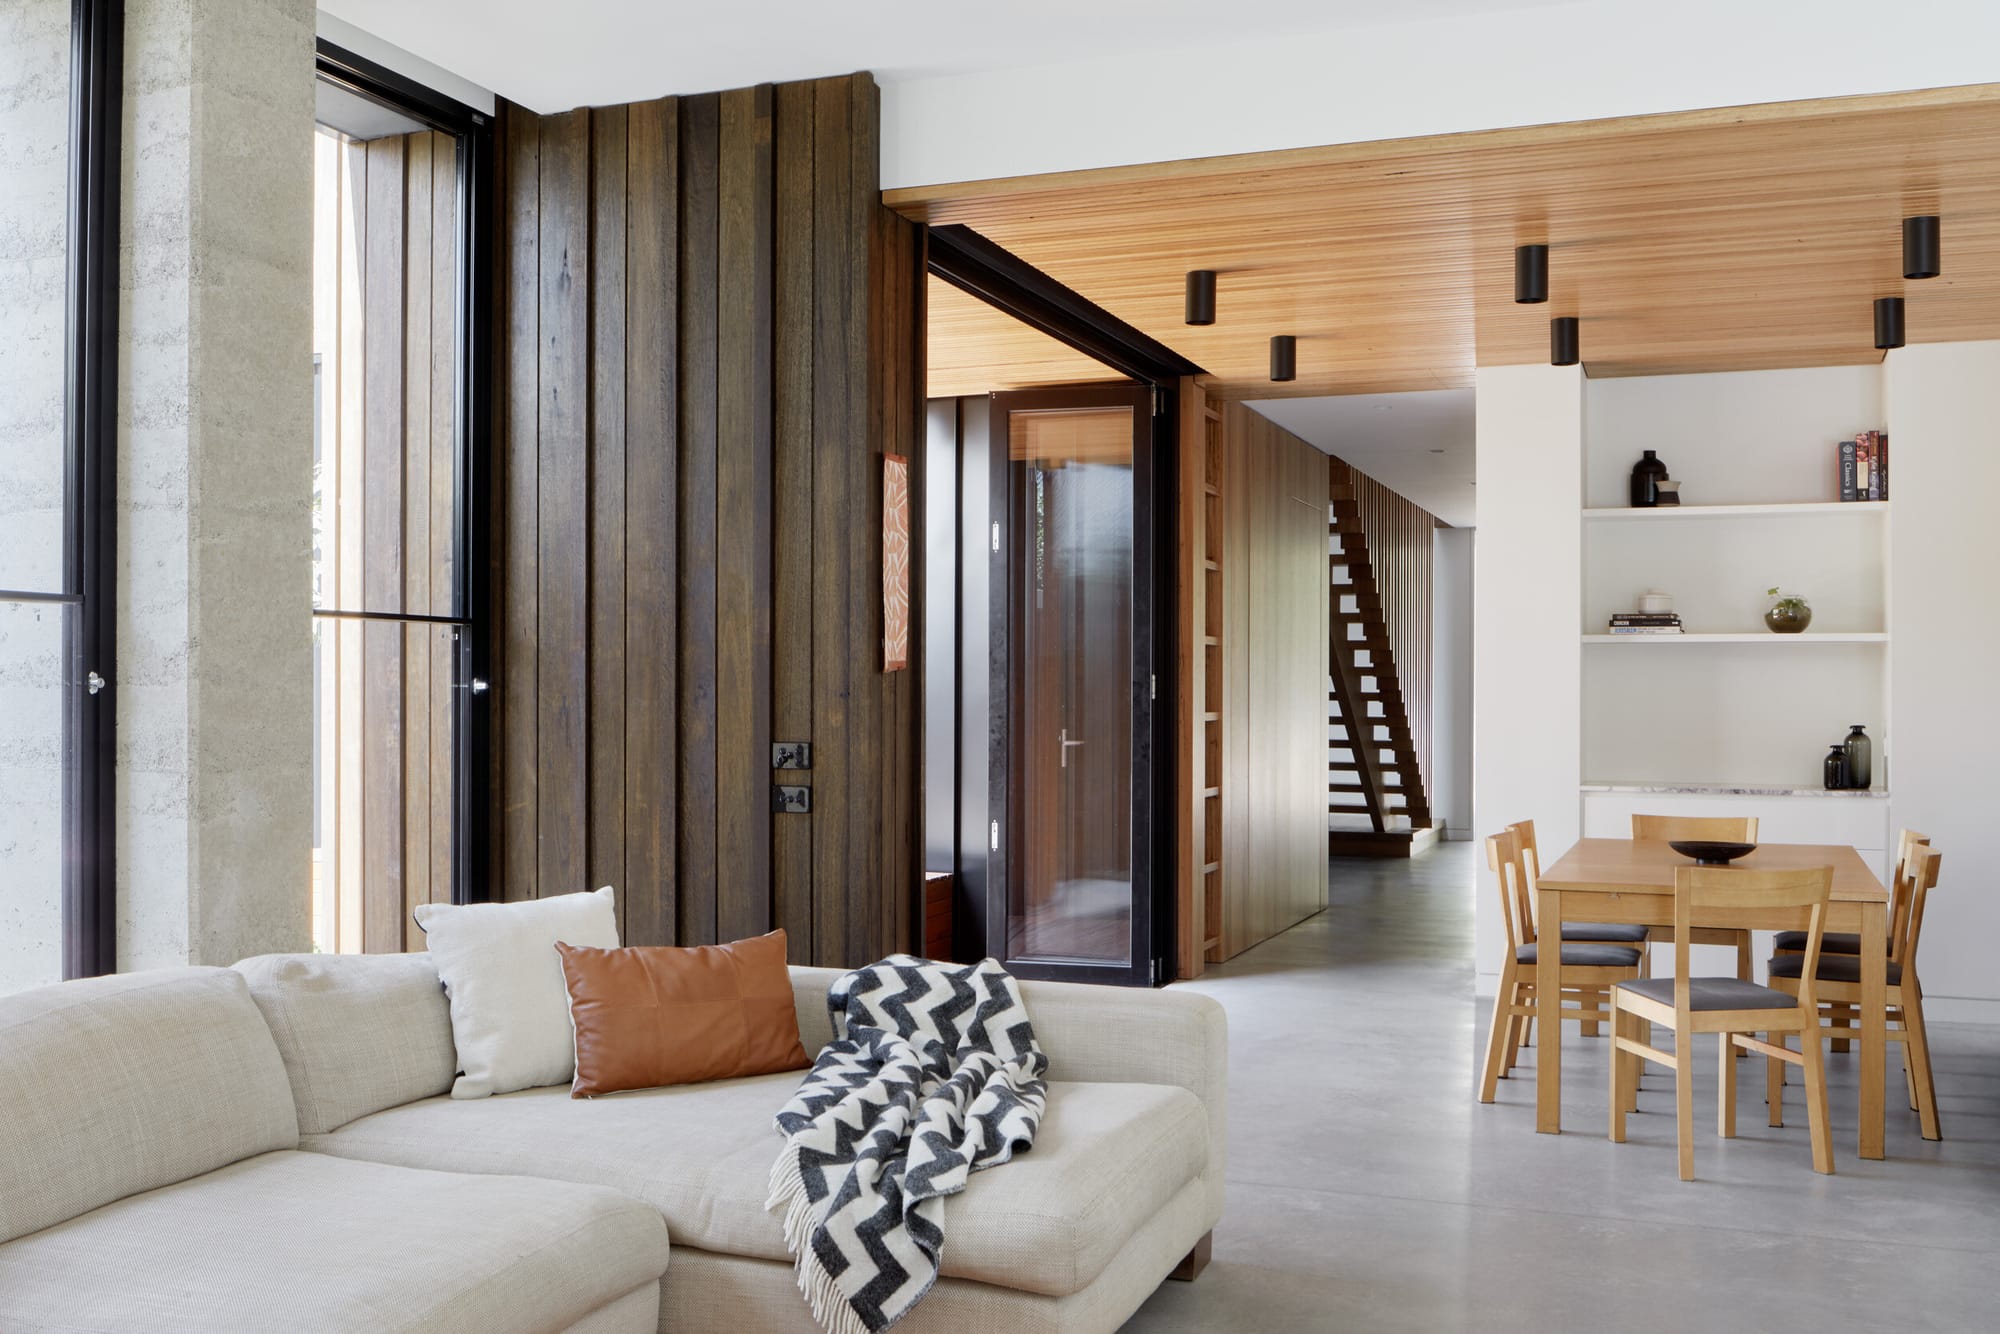 Laurel Grove by Kirsten Johnstone Architecture. Photography by Tatjana Plitt. Open plan living and dining area with polished concrete floor. Timber ceiling, wall and staircase in background.